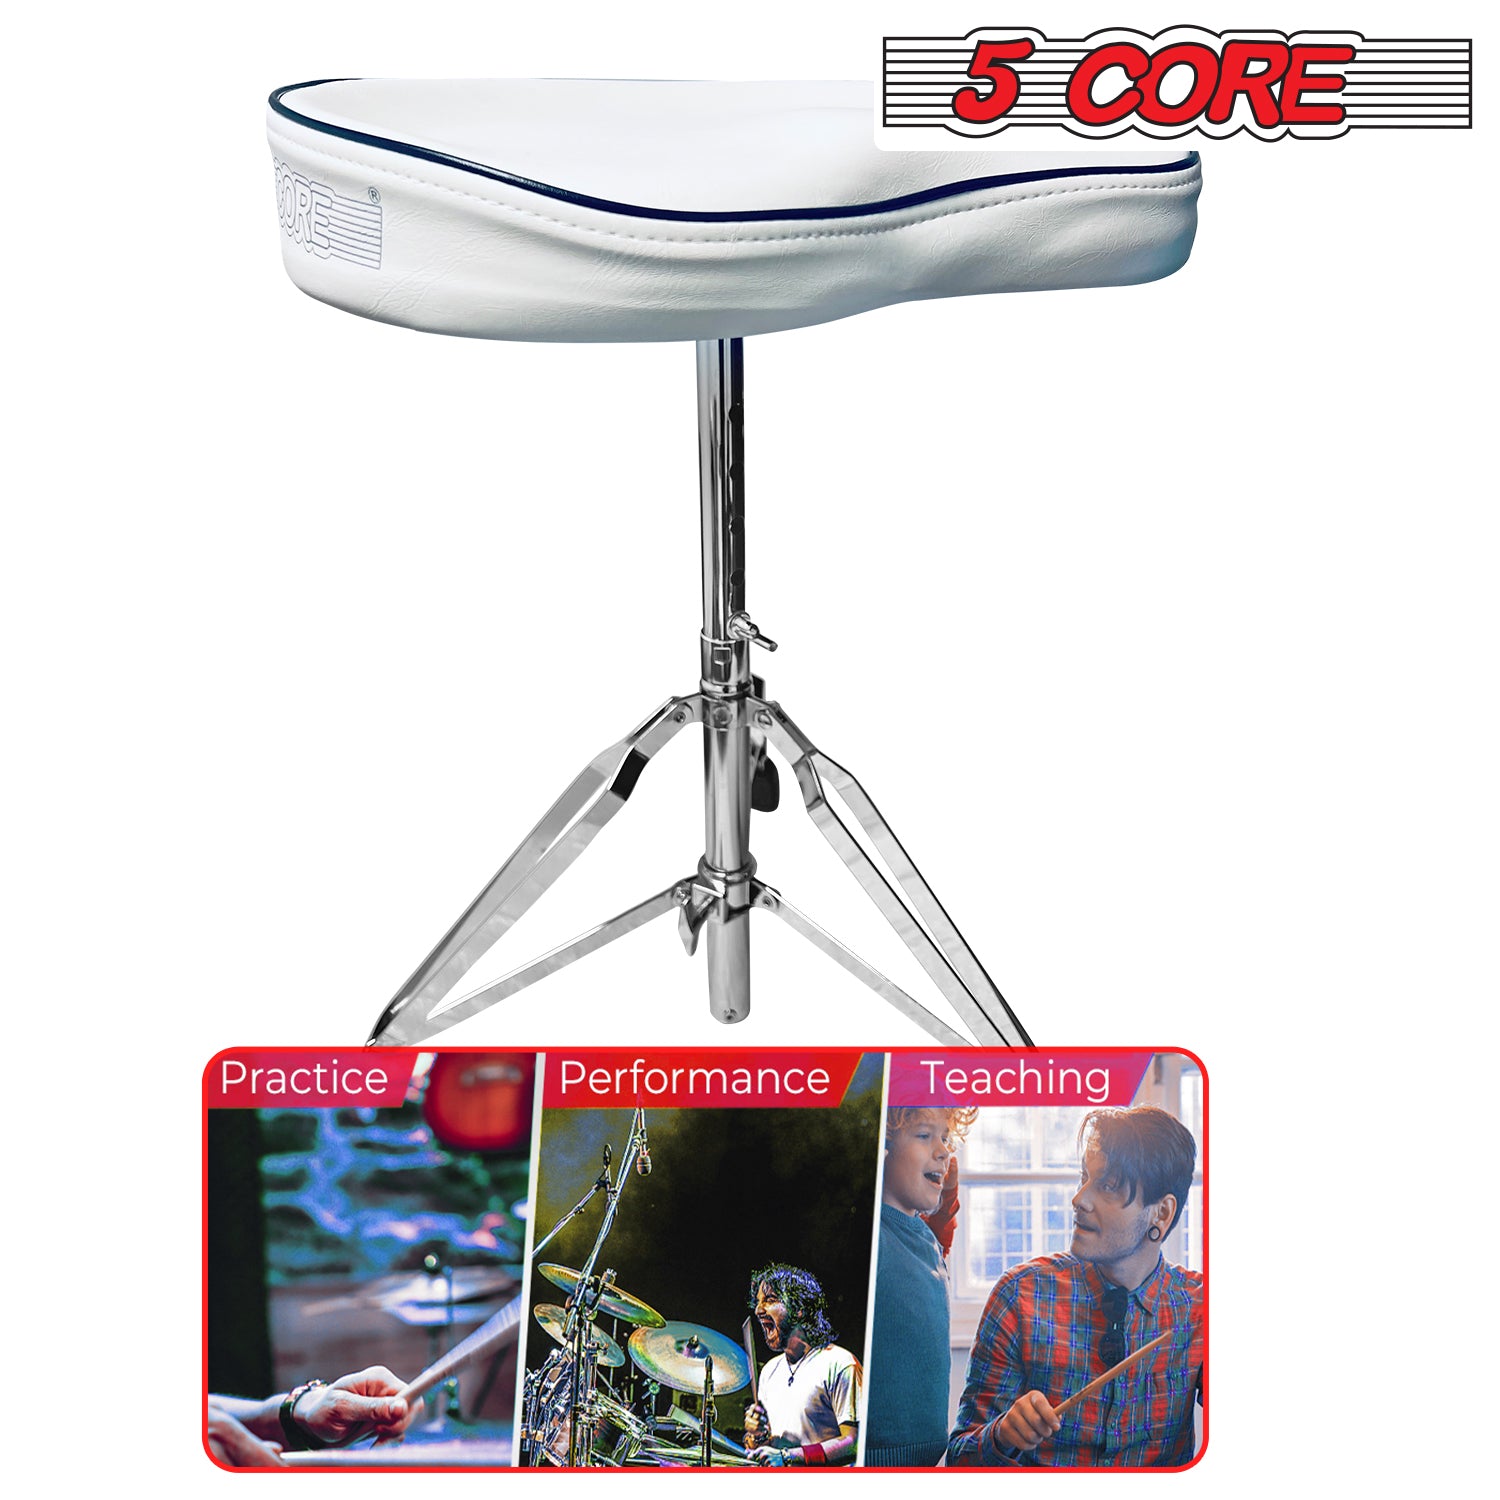 5 Core Drum Throne Thick Padded Comfortable Guitar Stool with Memory Foam Adjustable Padded Keyboard Chair Metal Piano Stool Premium Musician Chair White - DS CH BR SDL